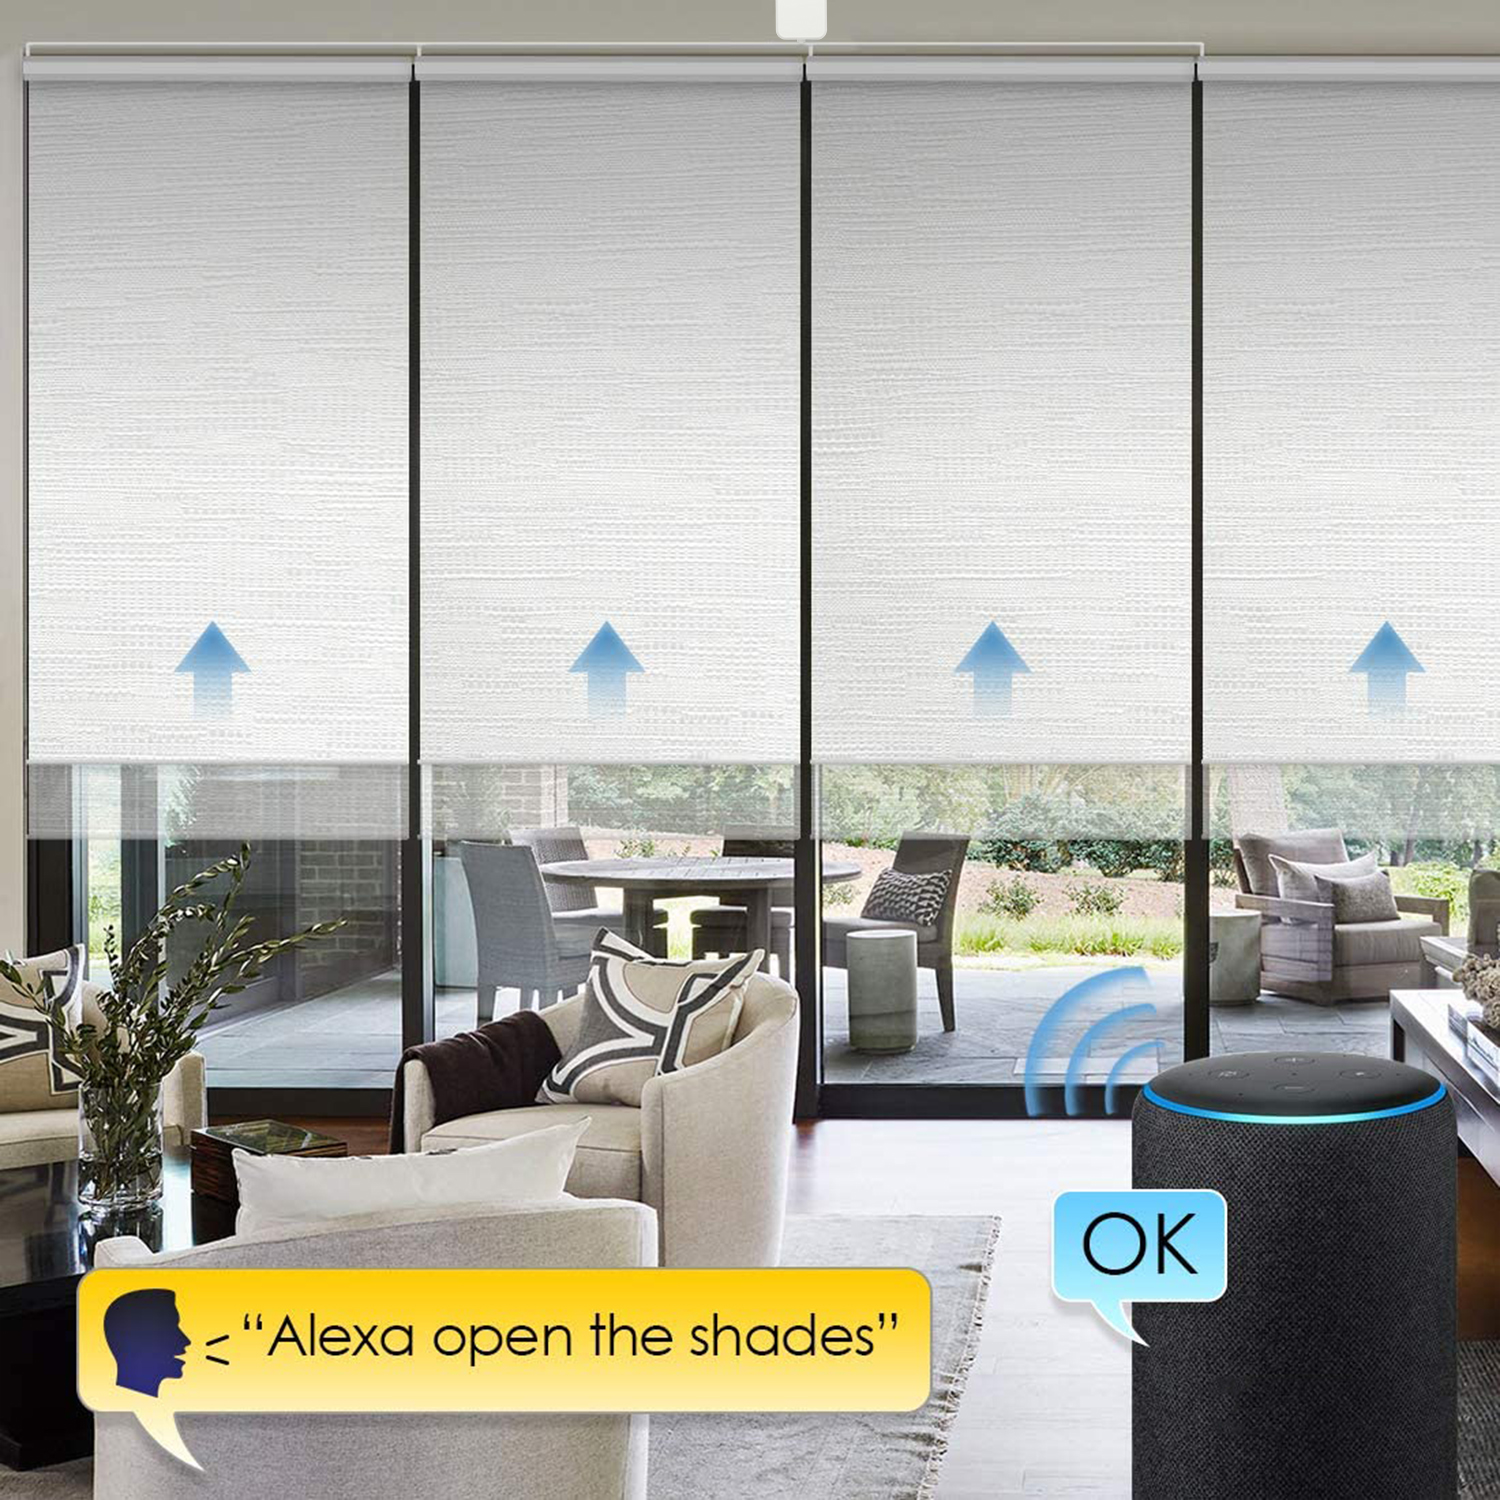 Smart Motorized Chain Roller Blinds Tuya WiFi Remote Voice Control Curtain Shade Shutter Drive Motor Work with Alexa/Google Home